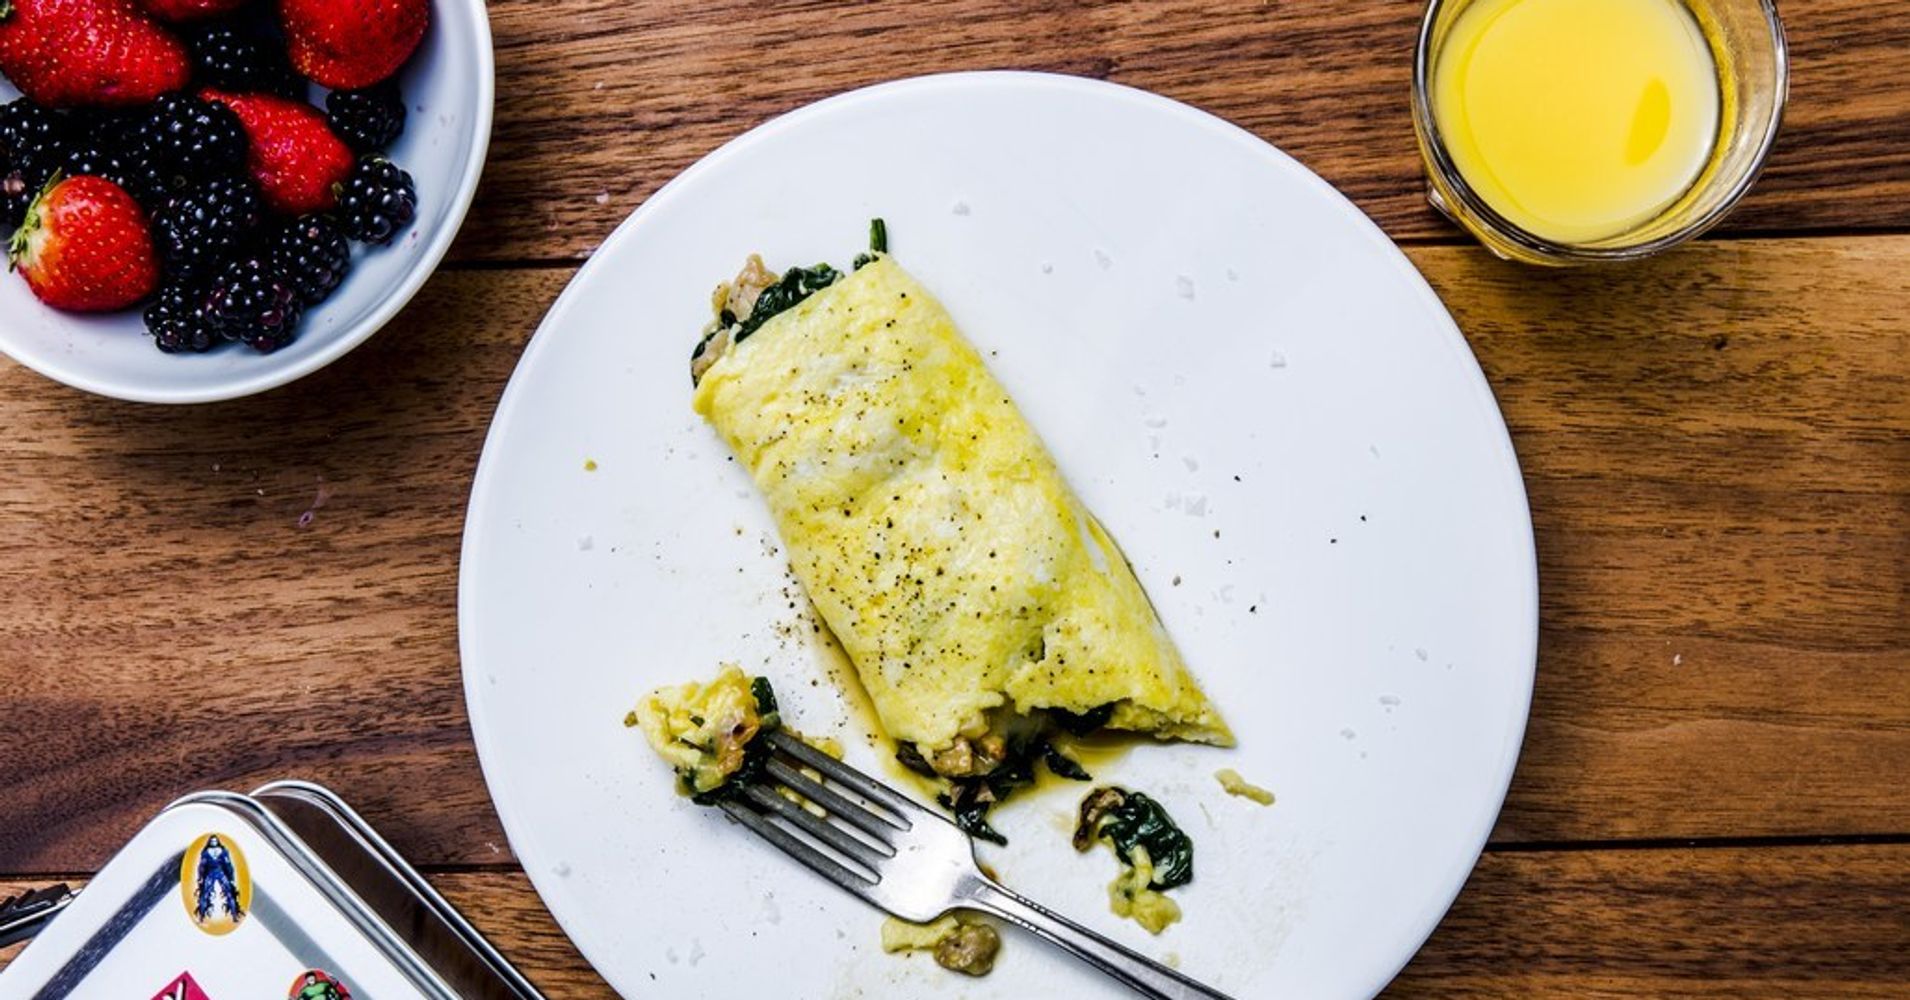 Why Do We Eat Eggs For Breakfast, Anyway? | HuffPost